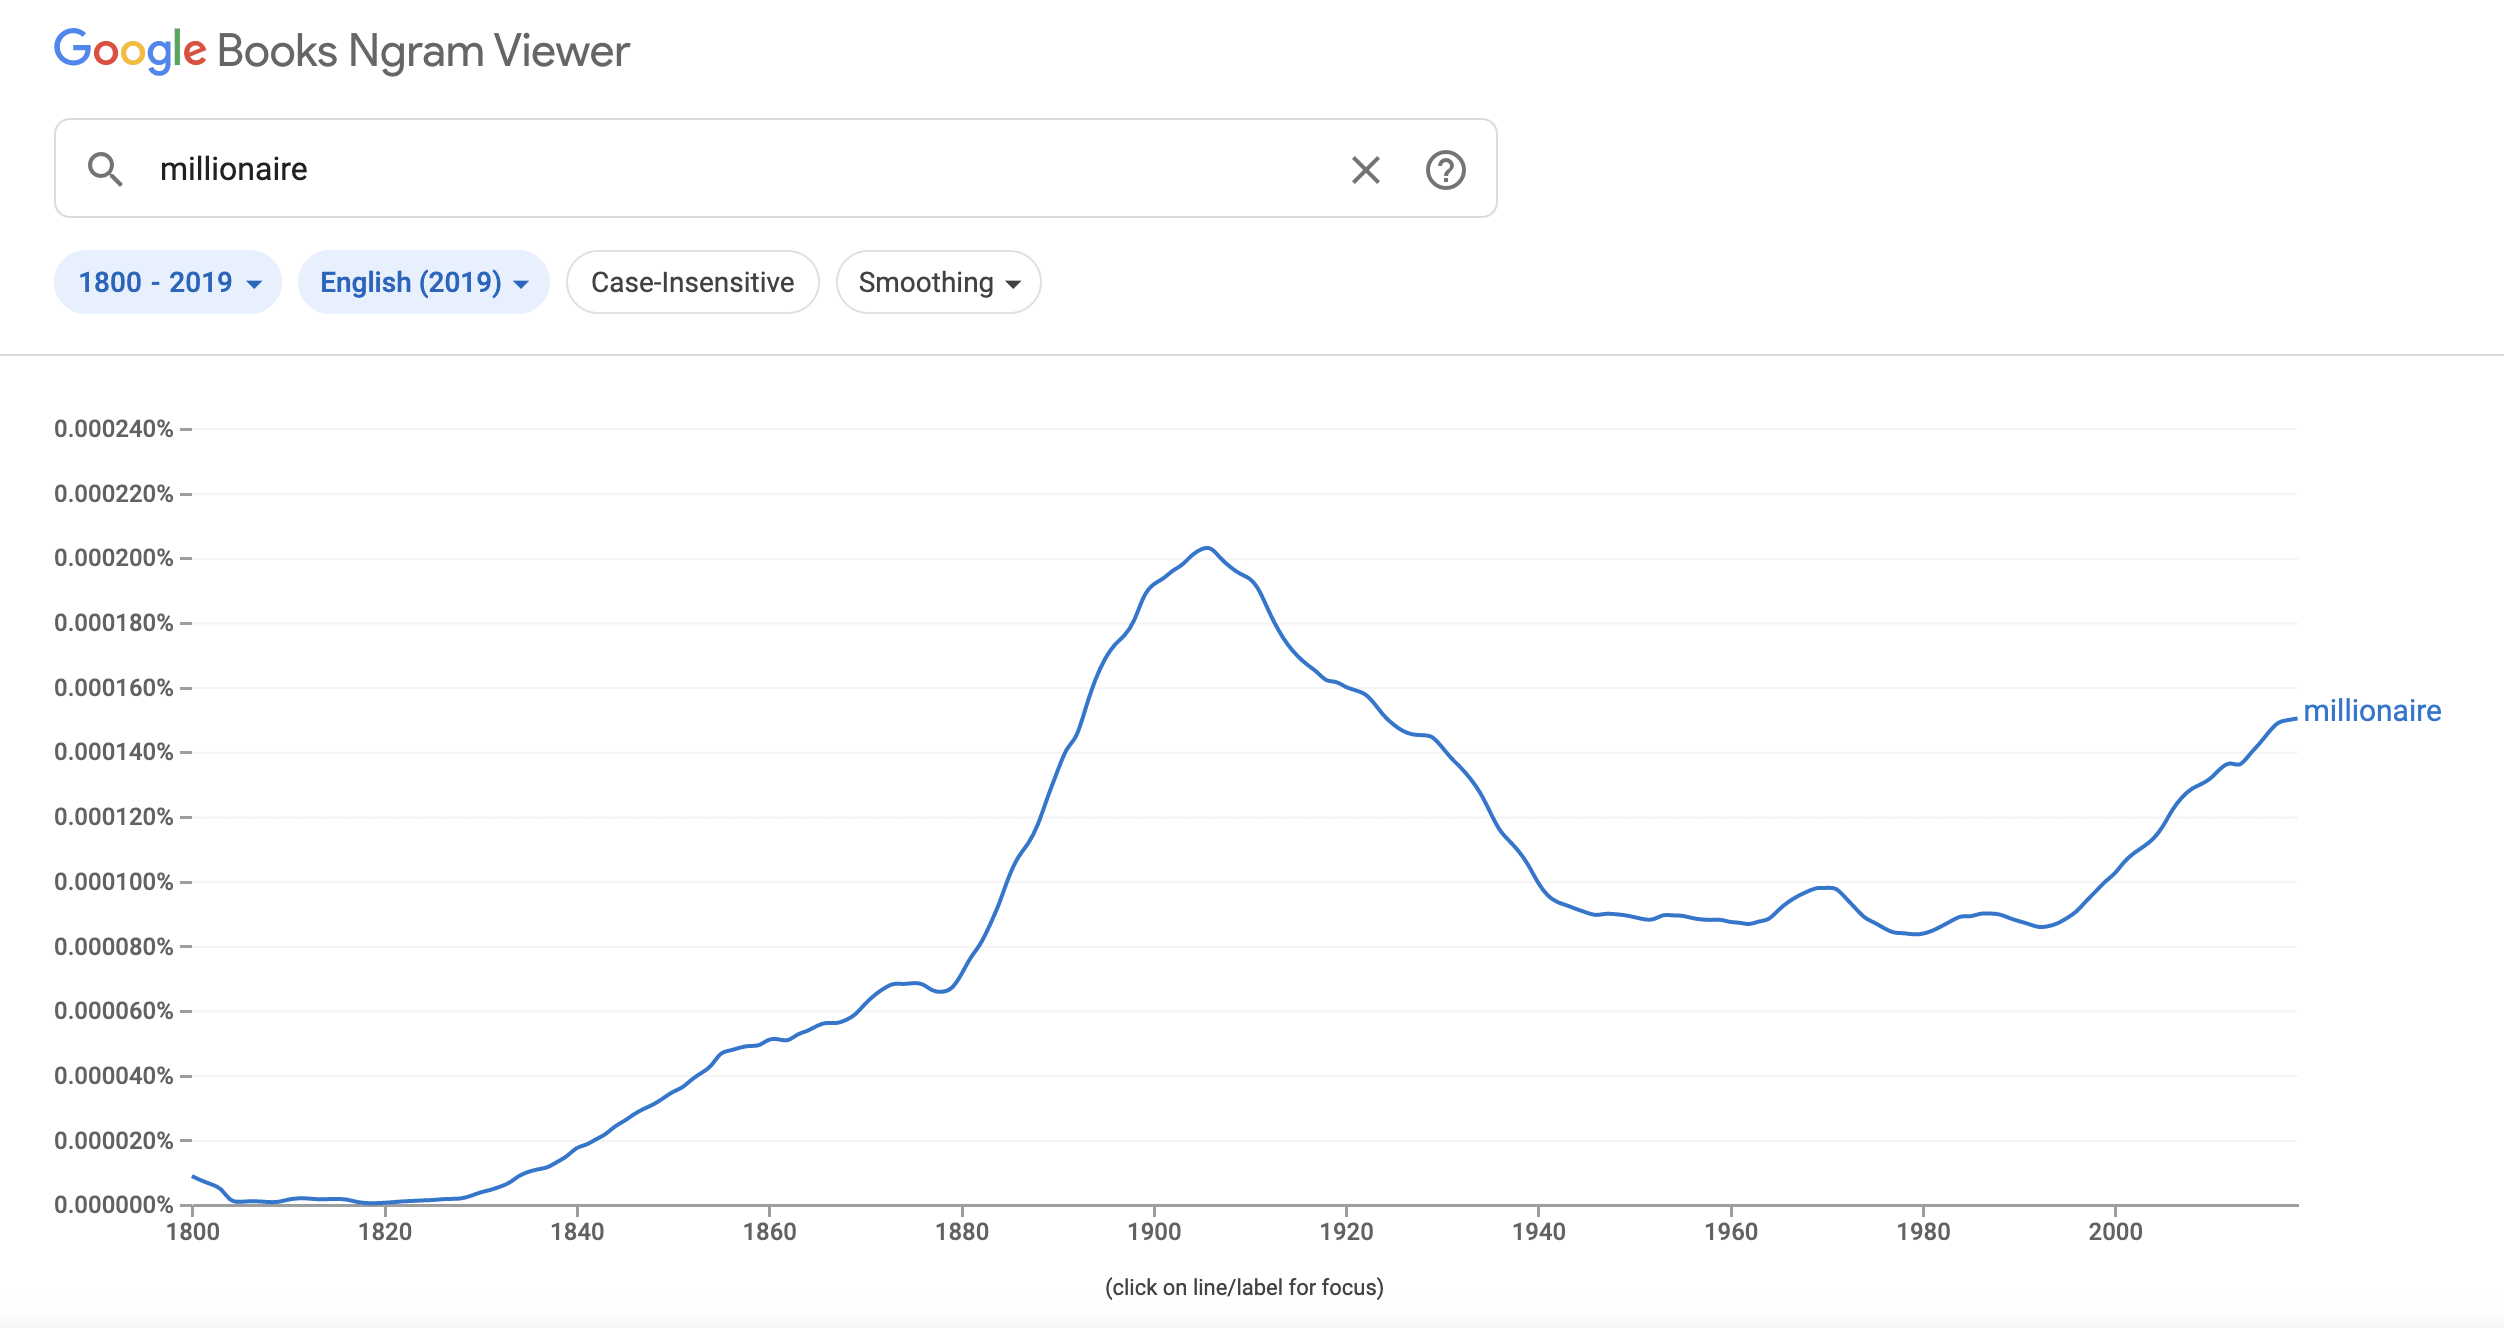 Popularity of the word million in books since 1800